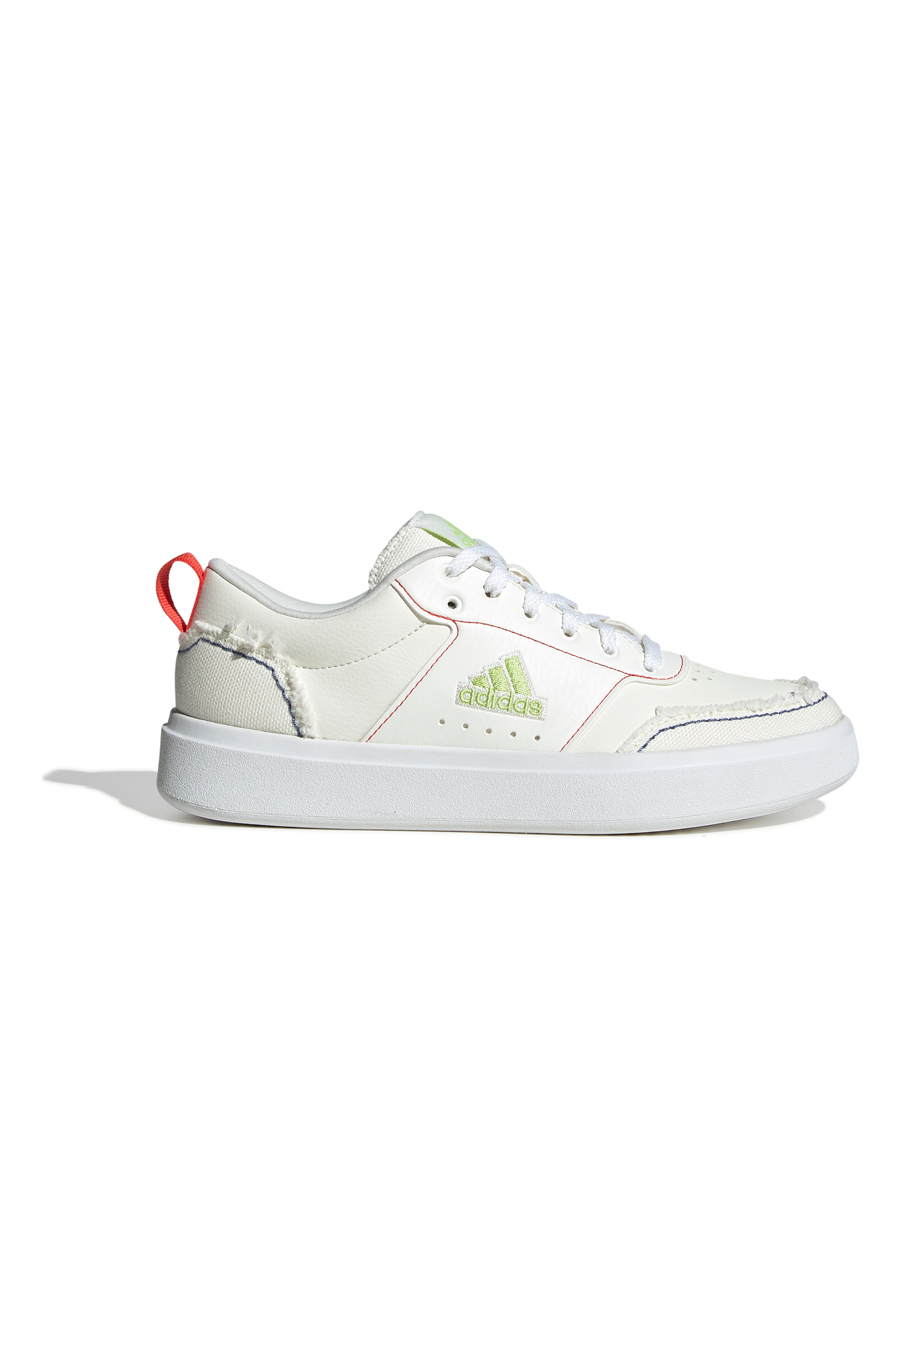 ADIDAS PARK ST SNEAKERS bianco per donna